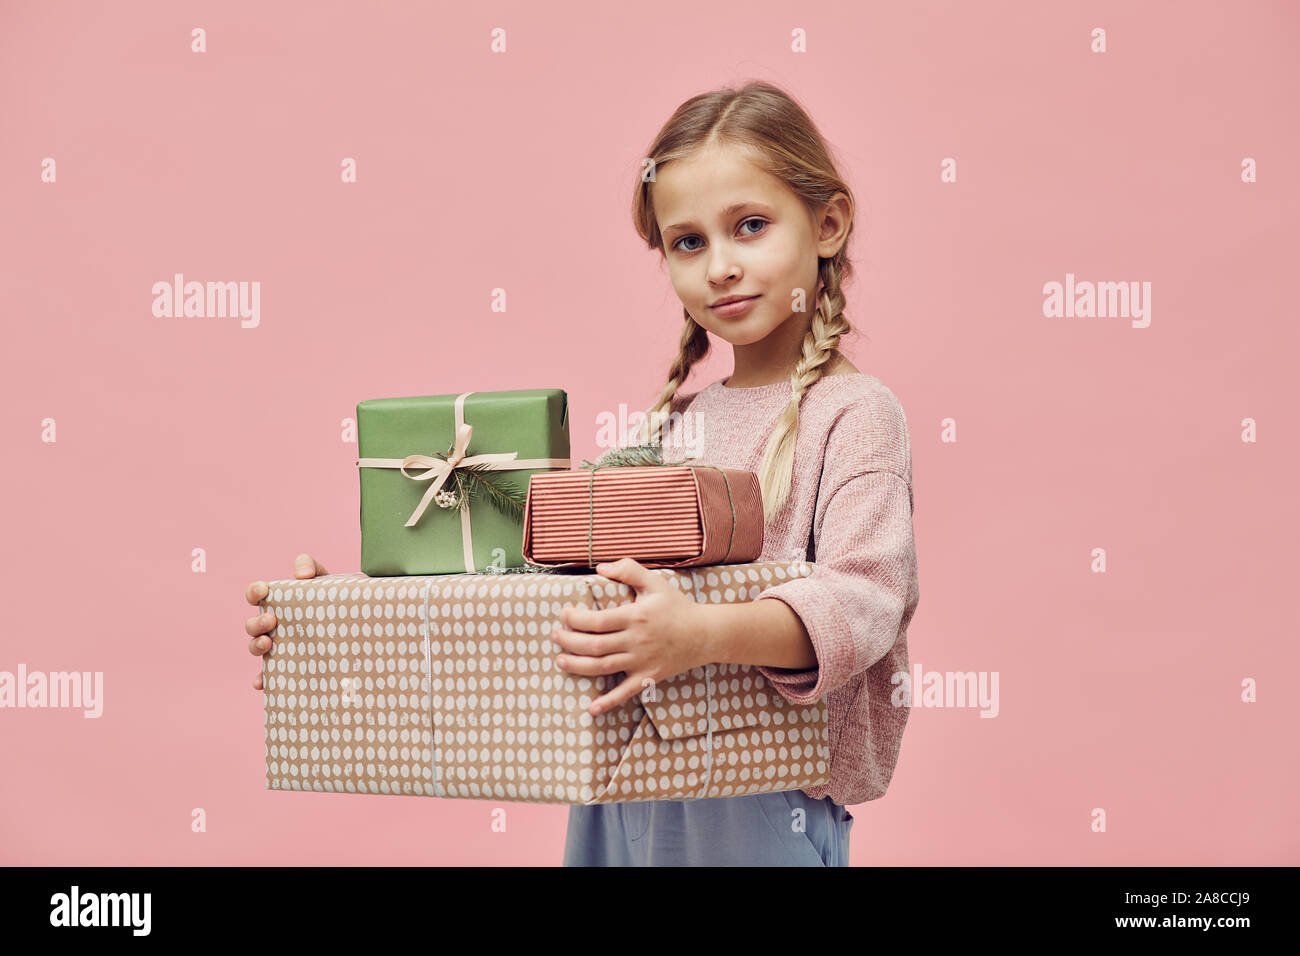 Portrait of little girl with blond hair holding wrapped gift boxes giving her on her birthday and looking at camera over pink background Stock Photo